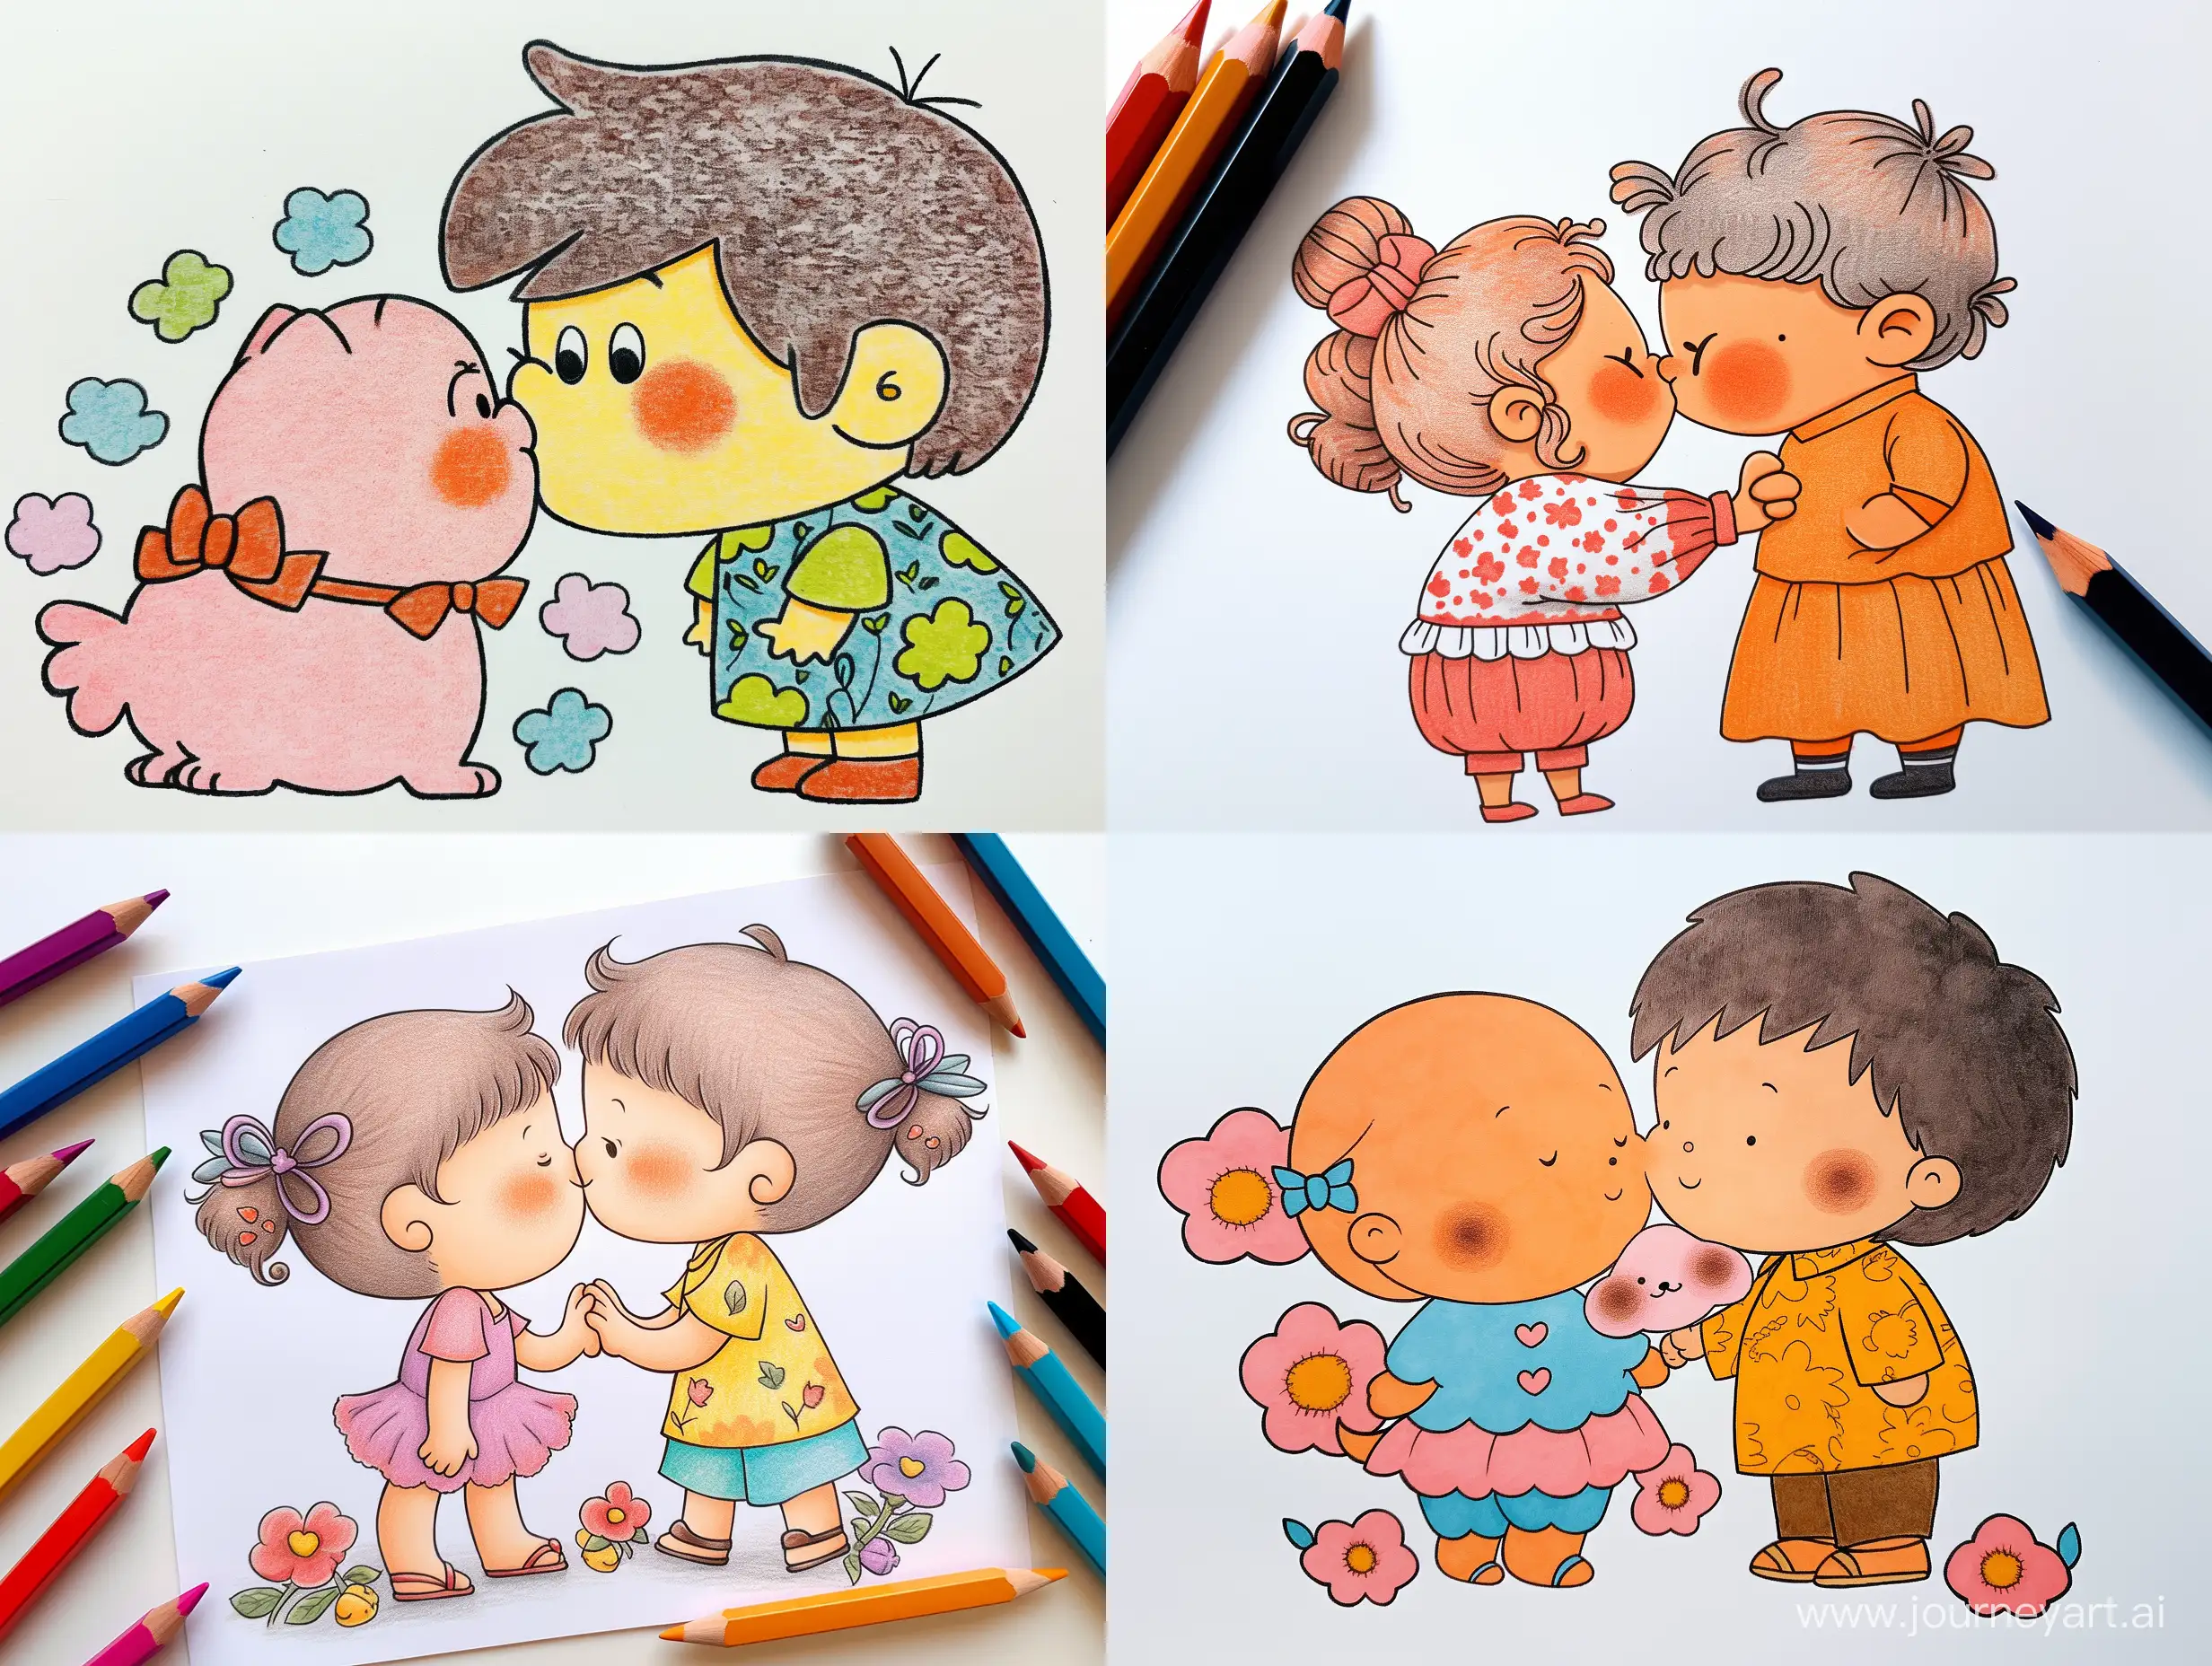 kids hand drawing style of a doodle drawing figures, a couple kissing,  valentines theme, pencil kids drawings, minimalistic, vivid colors, colorful, based on the stile of Bubert illustrator, white background --ar 4:3 --s 250 --style expressive --niji 5